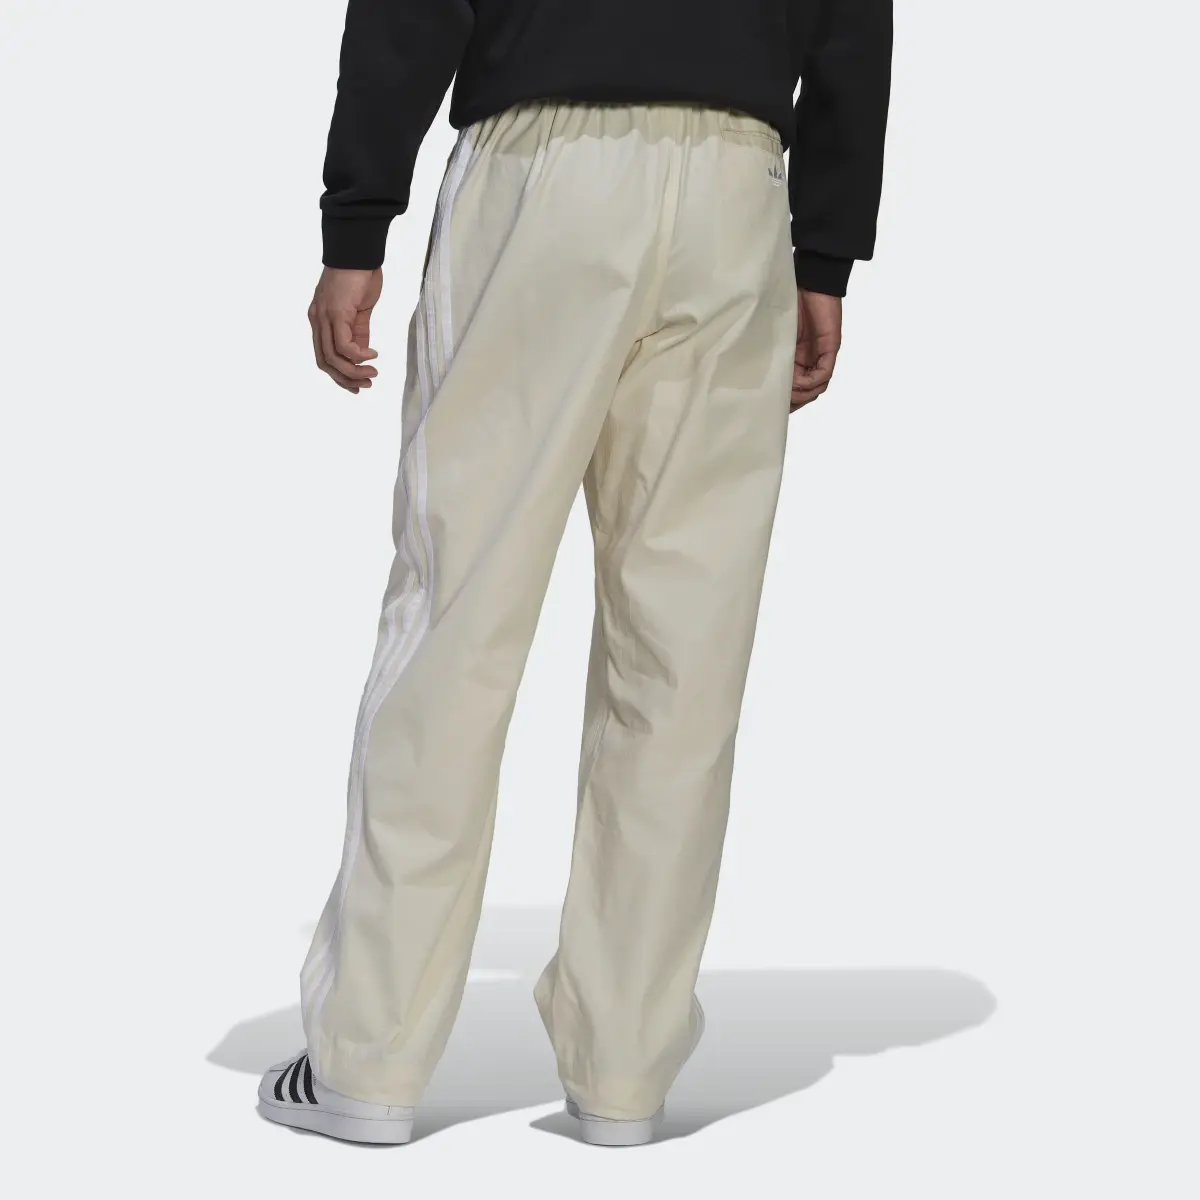 Adidas Work Trousers. 2